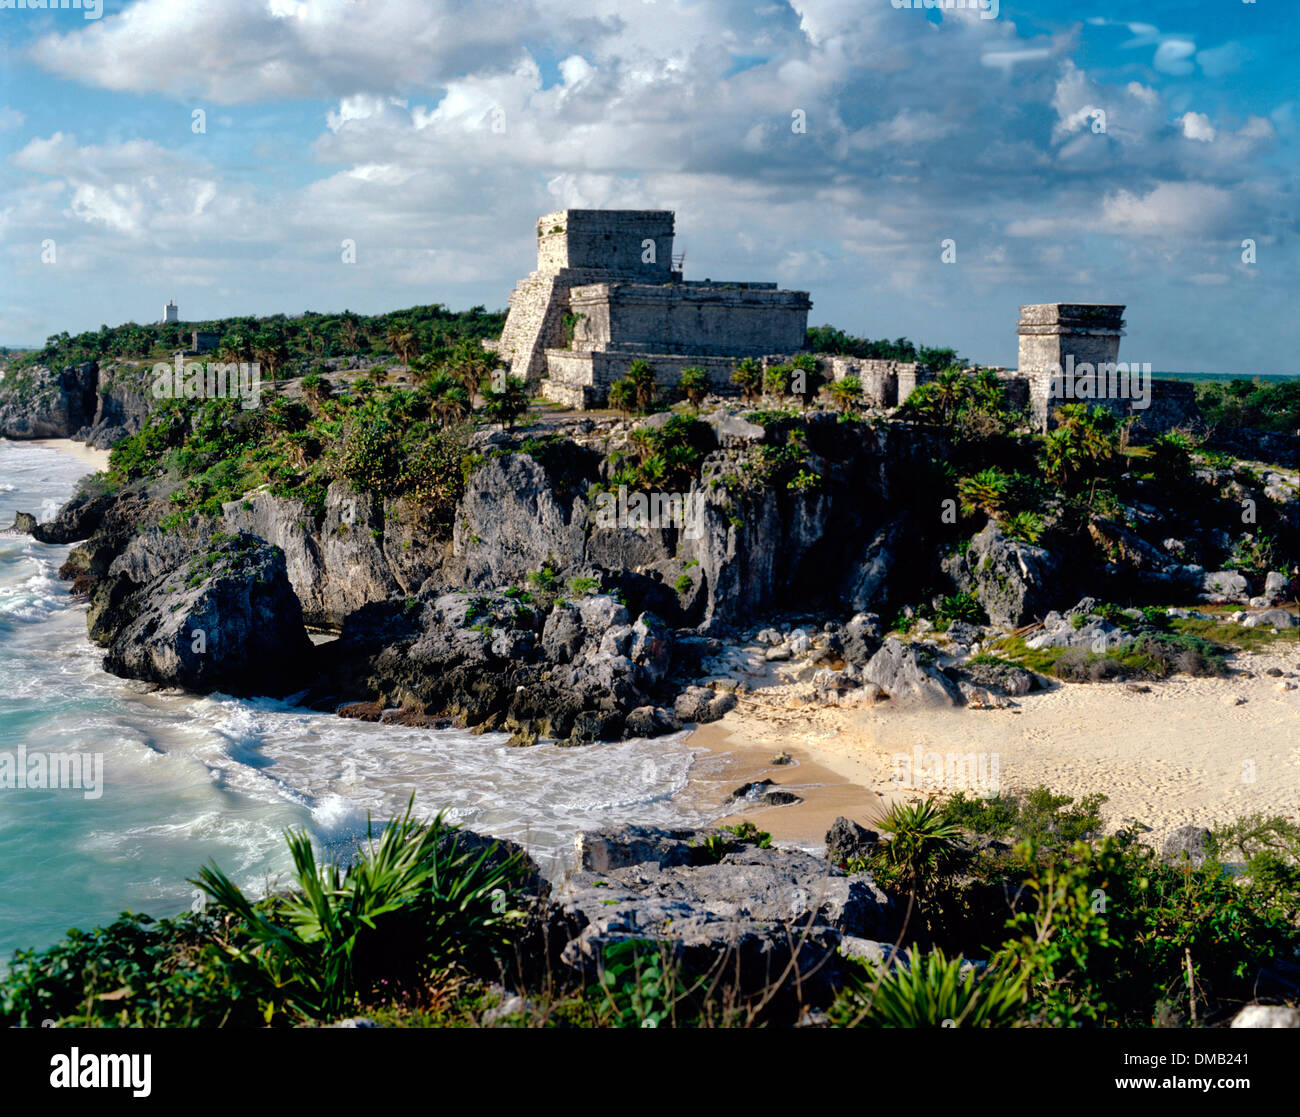 Seaside view of ancient Mayan Ruins showing the Castle (El Castillo), Tulum, Mexico Stock Photo